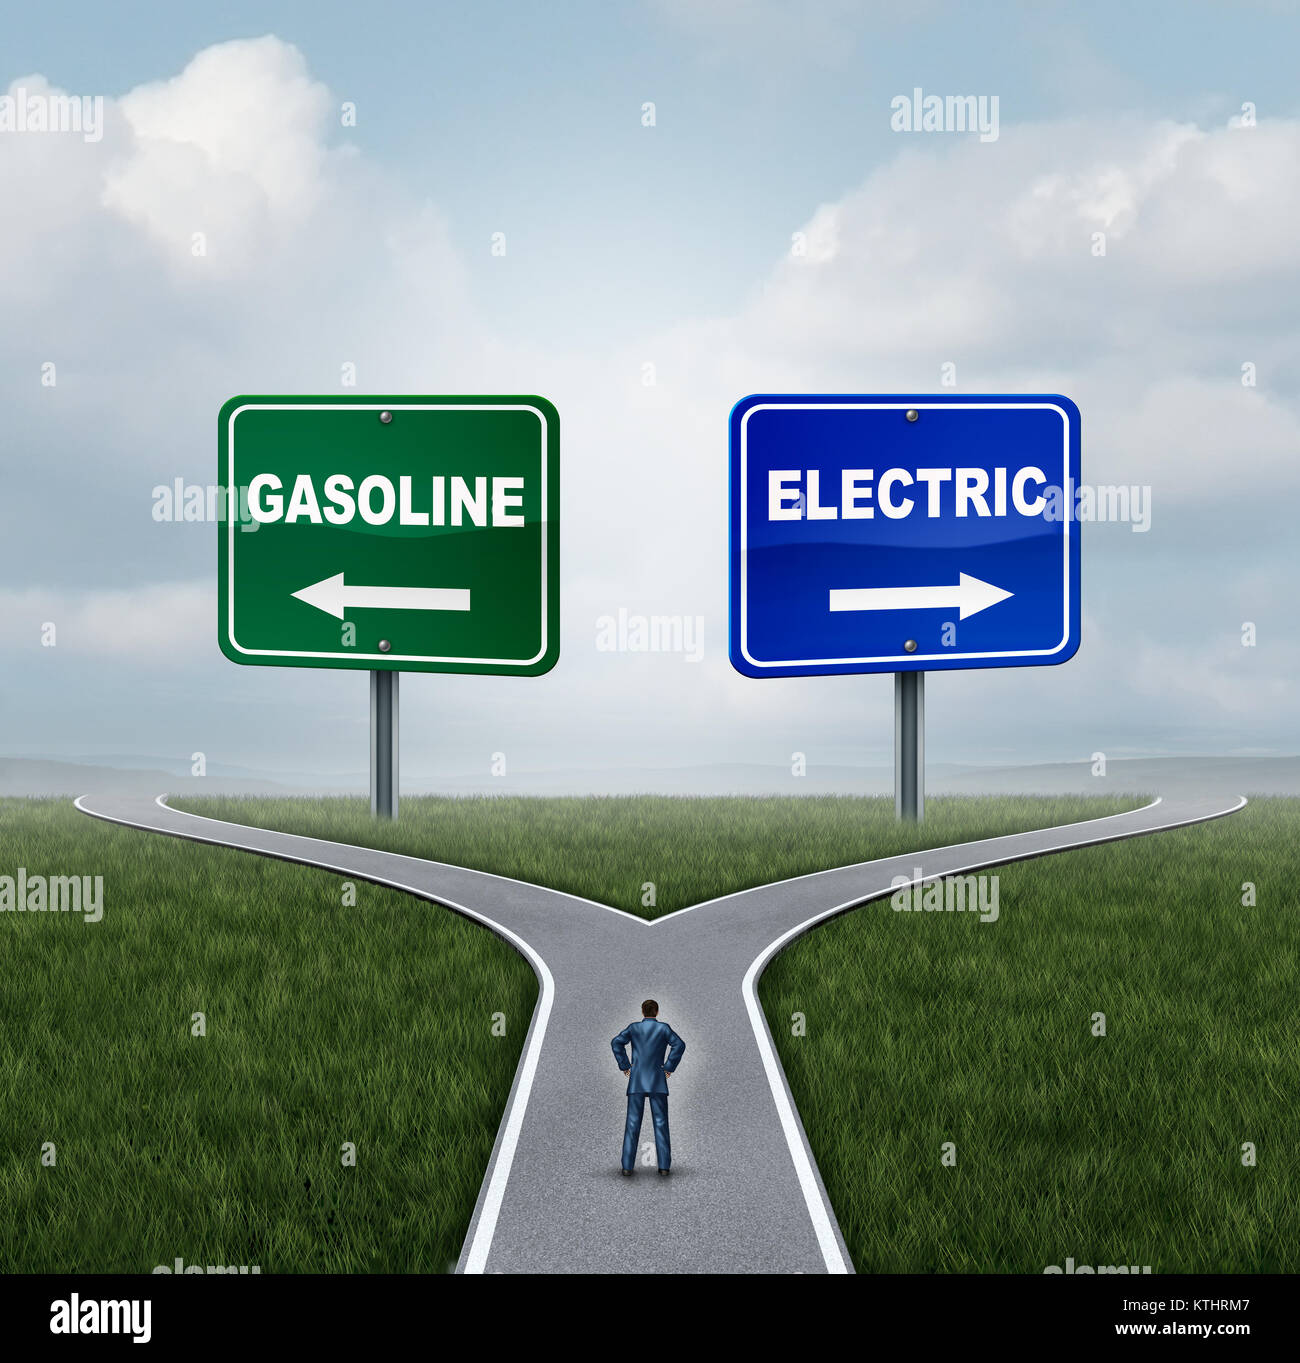 Electric or gasoline energy choice concept as a confused person on a crossroad deciding between gas fuel power or battery power. Stock Photo